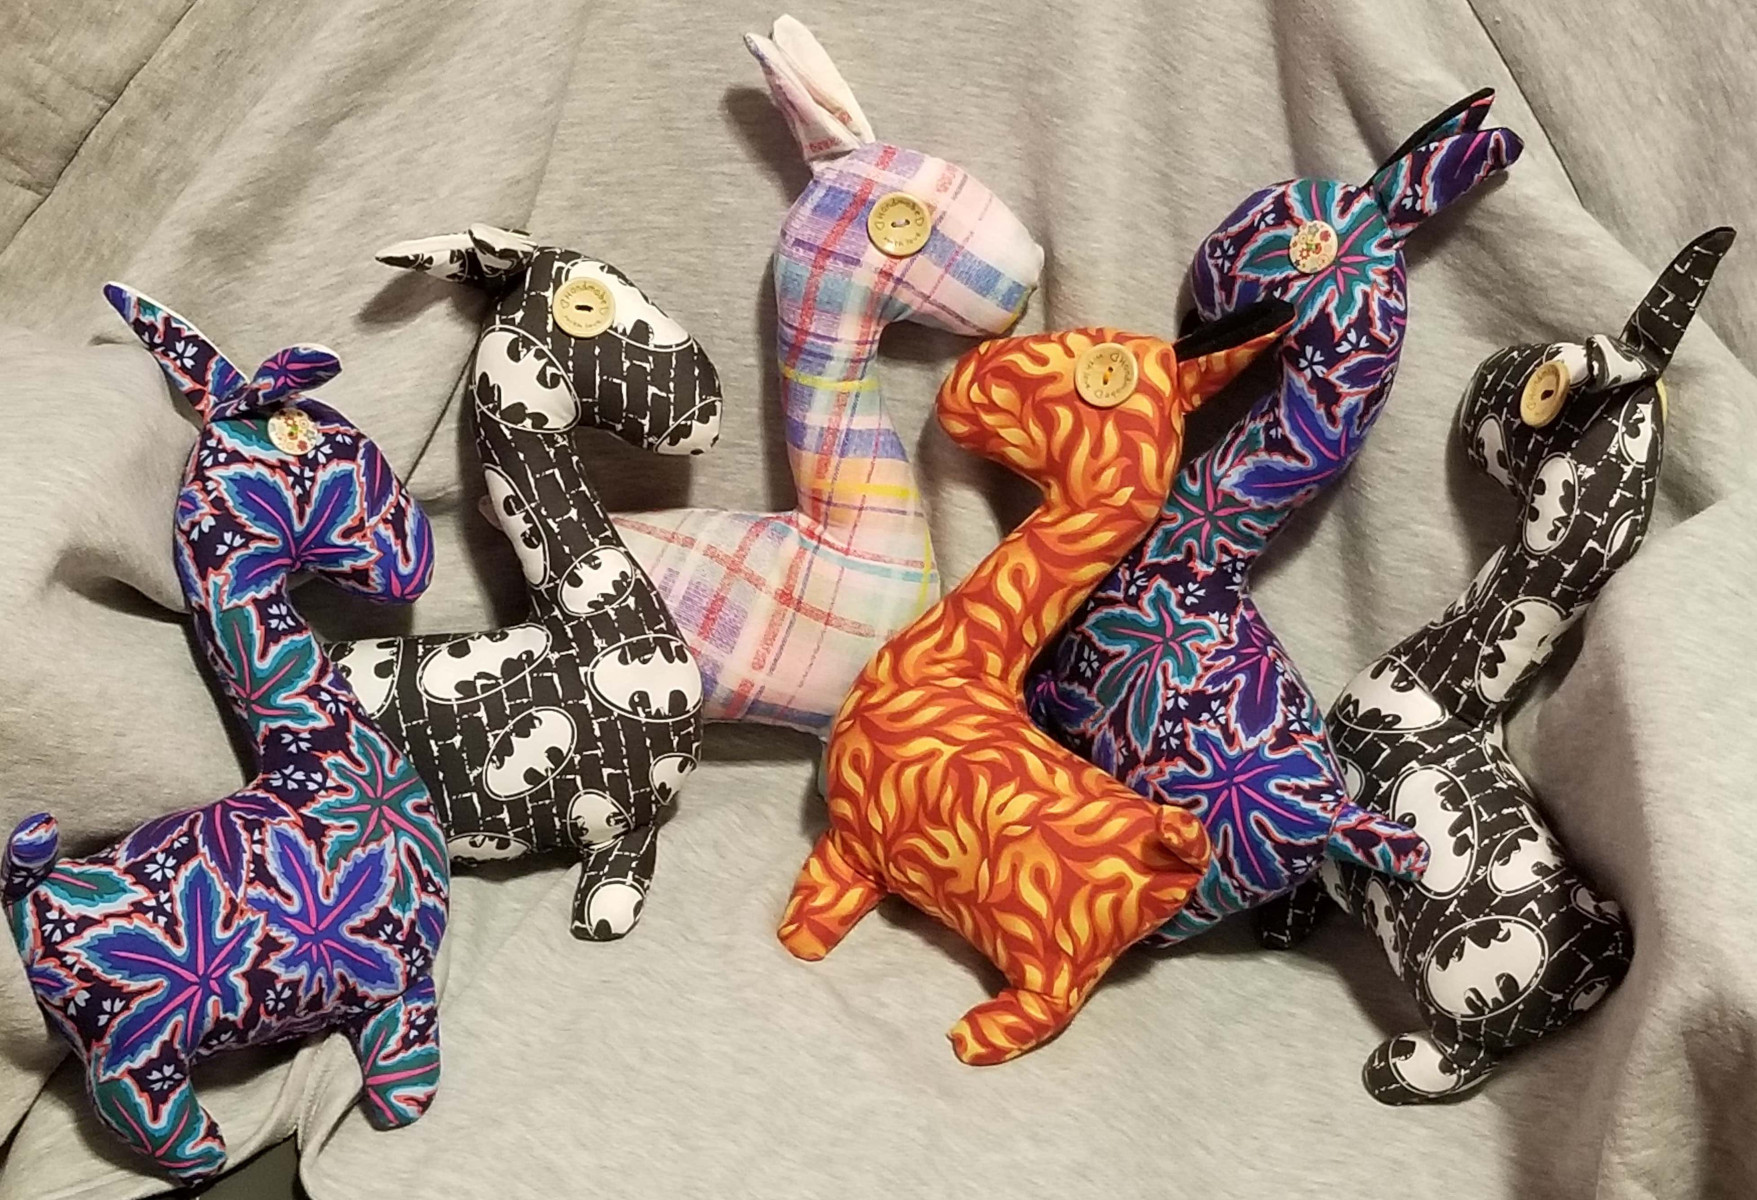 Six colourful stuffed animal Llamas, created by Jaclyn. The llamas have tactile elements like button eyes. 